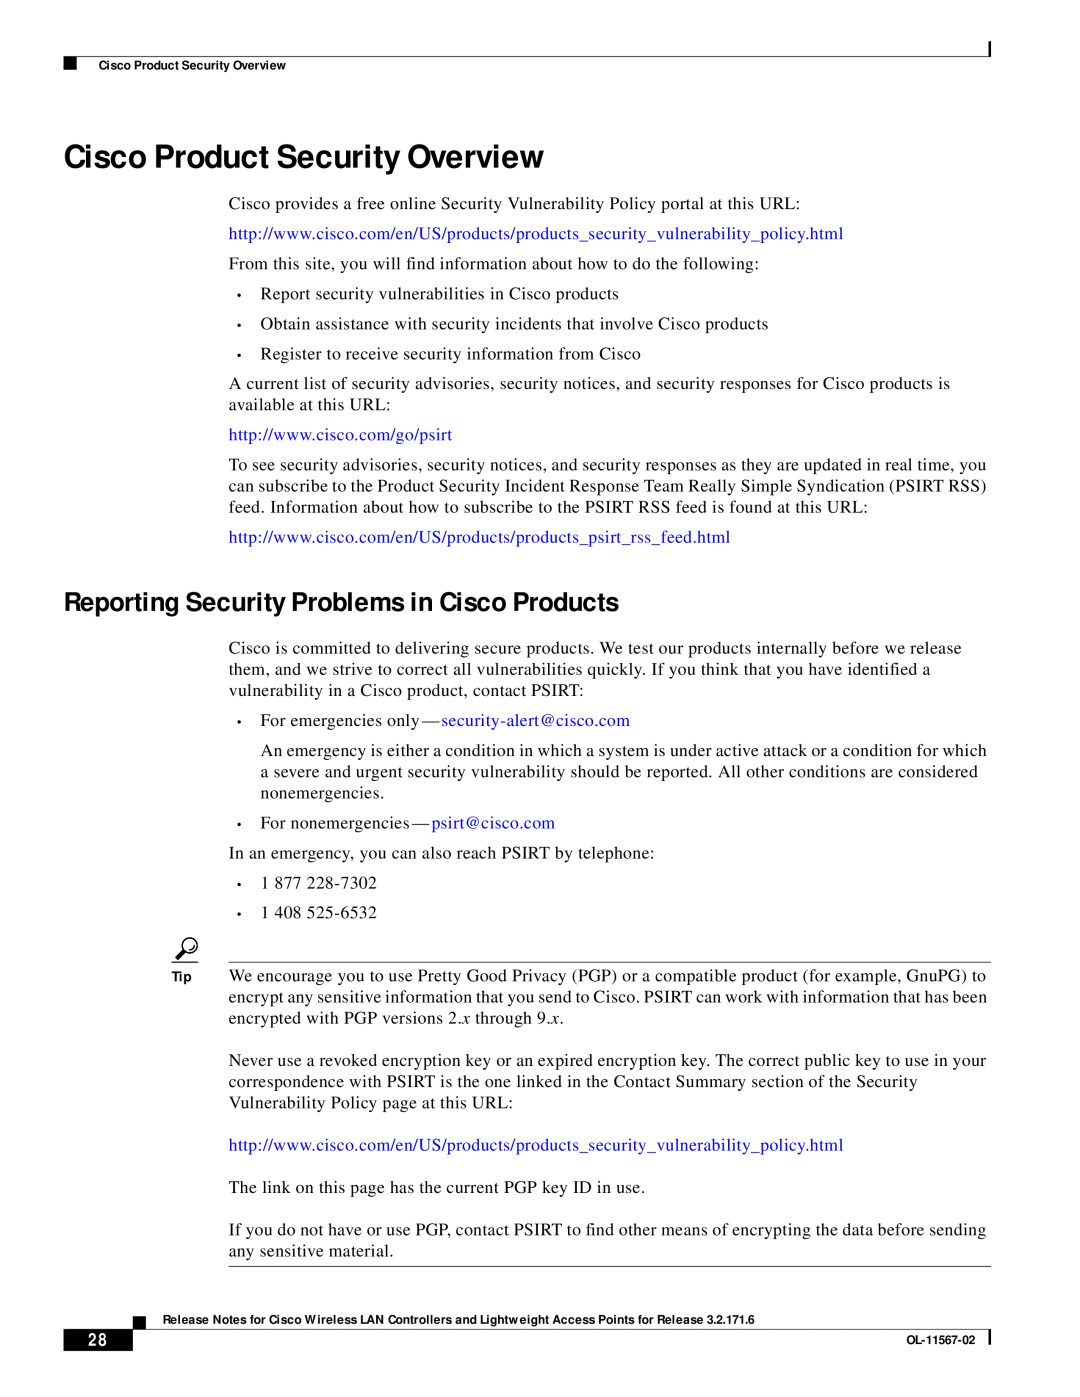 Cisco Systems OL-11567-02 manual Cisco Product Security Overview, Reporting Security Problems in Cisco Products 